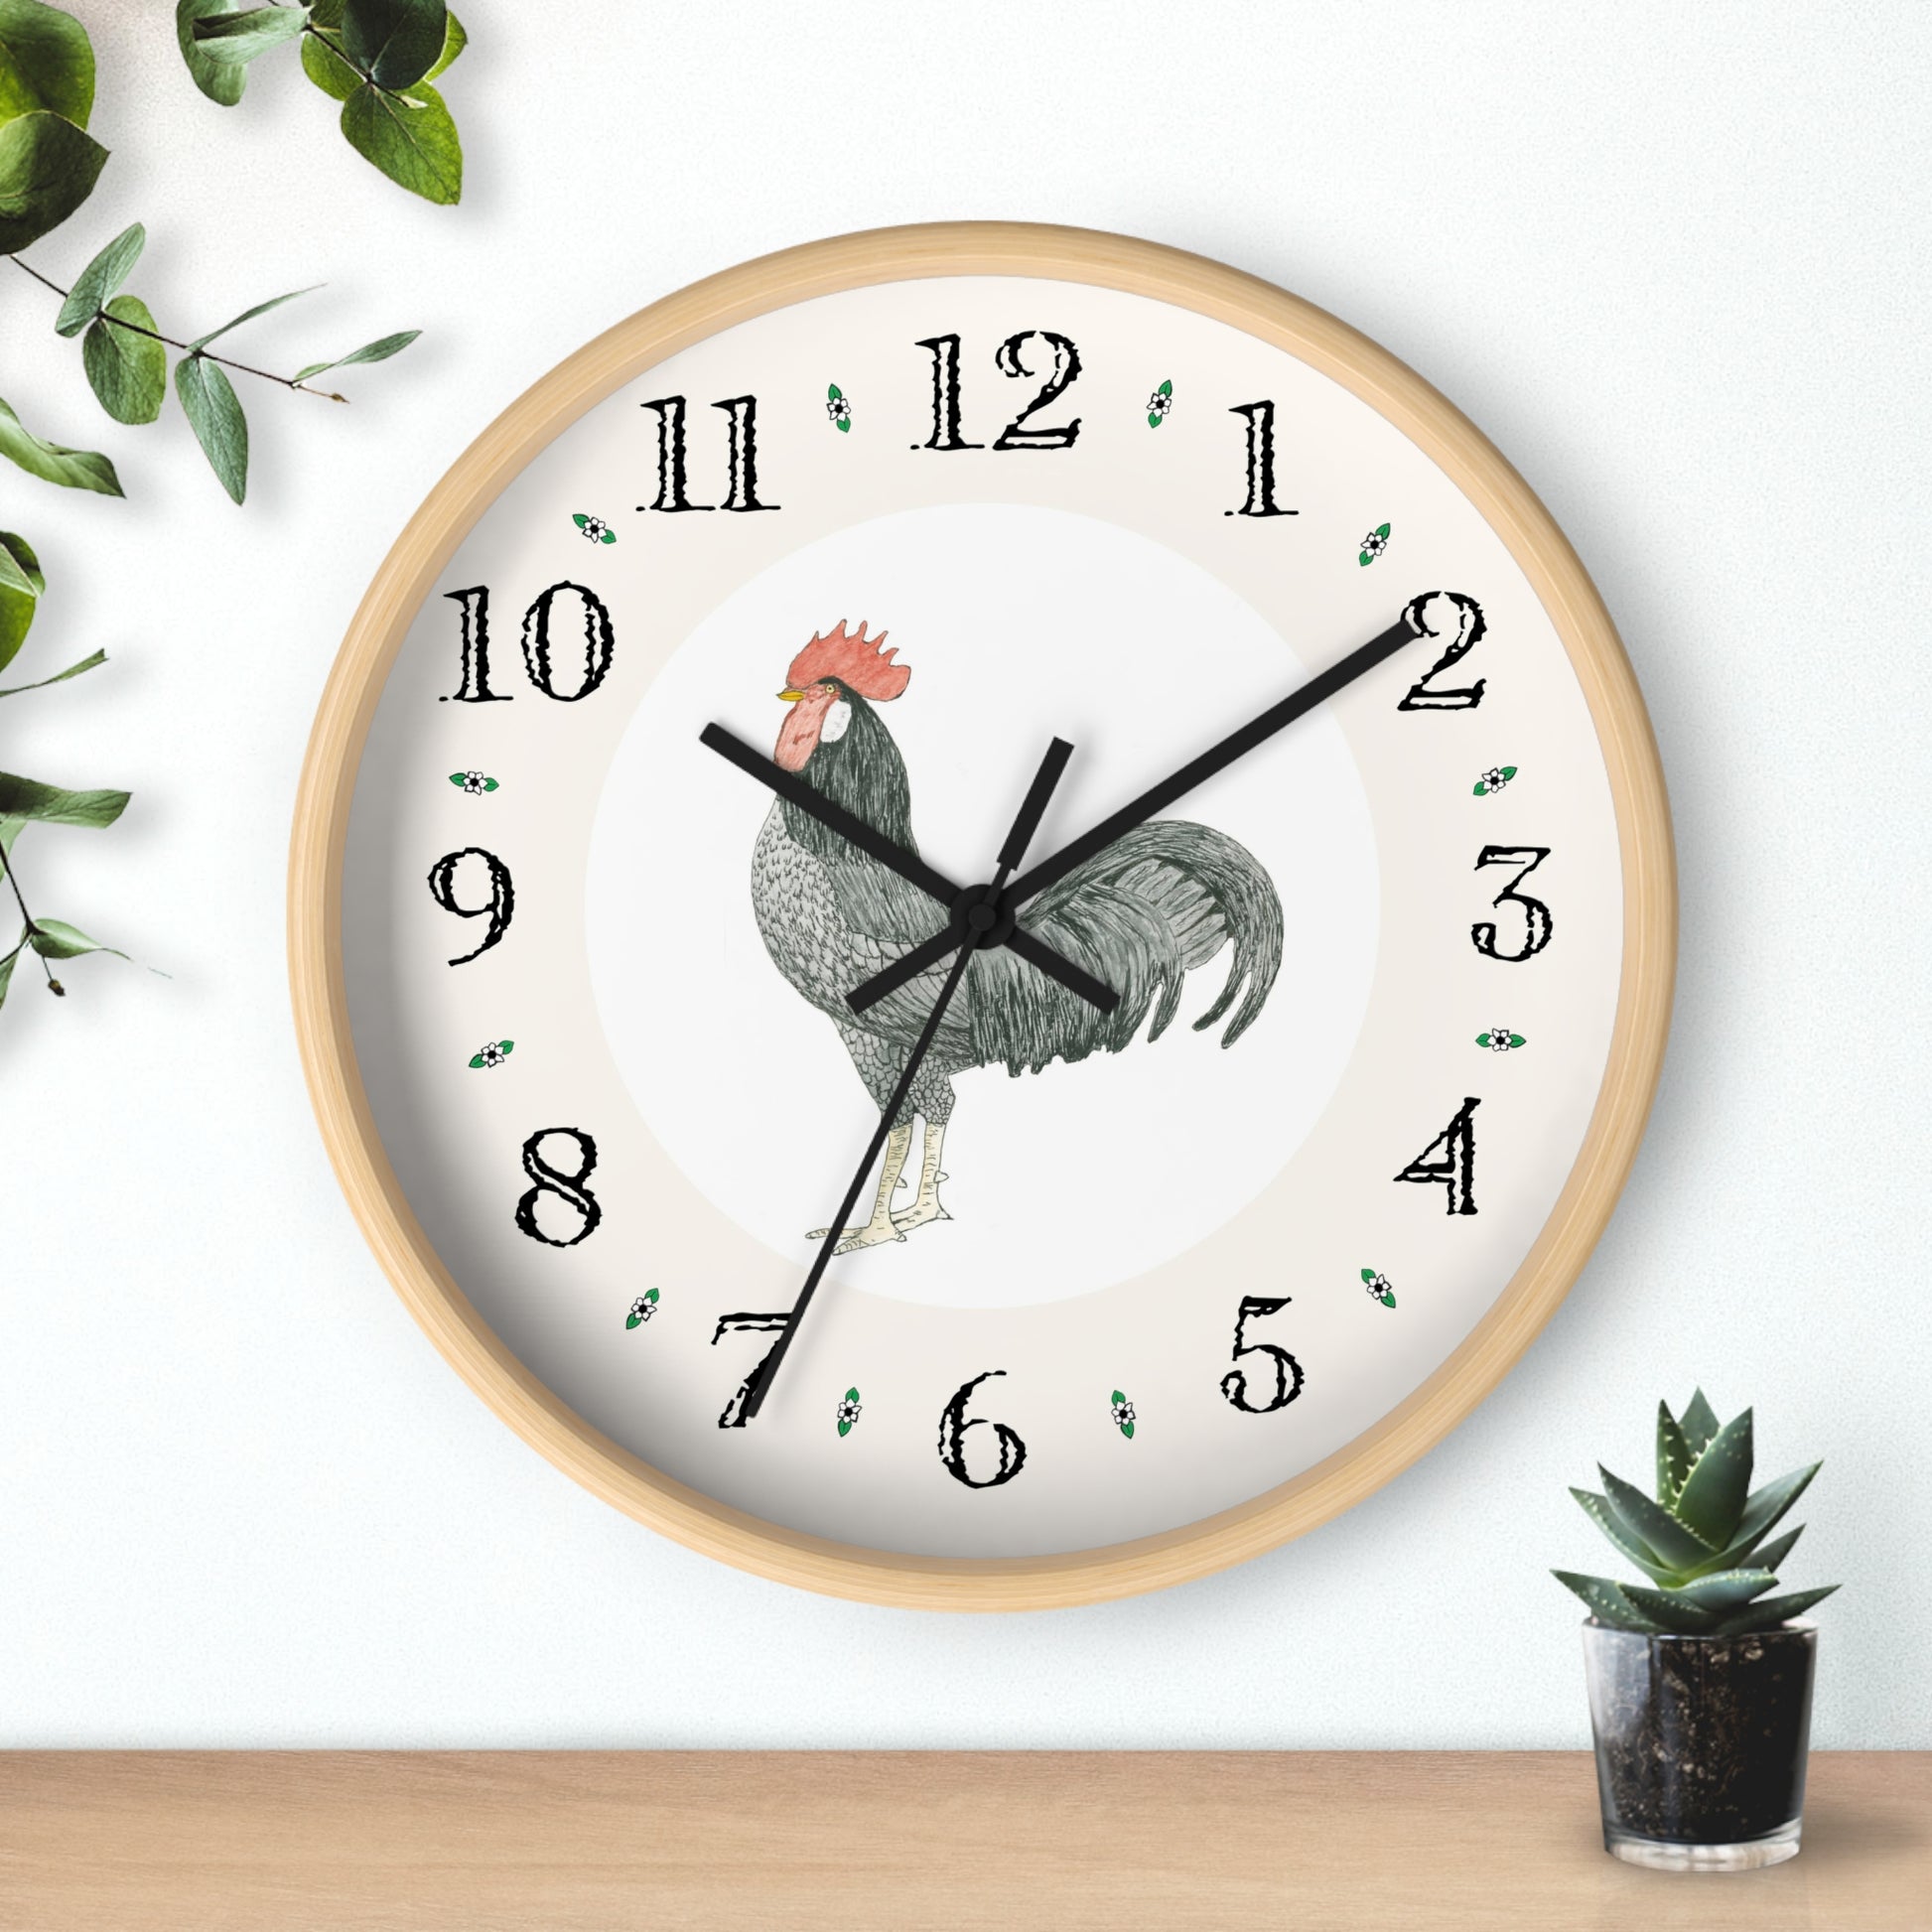 The Adam Rooster Heritage Designer Clock adds a special touch to any room.